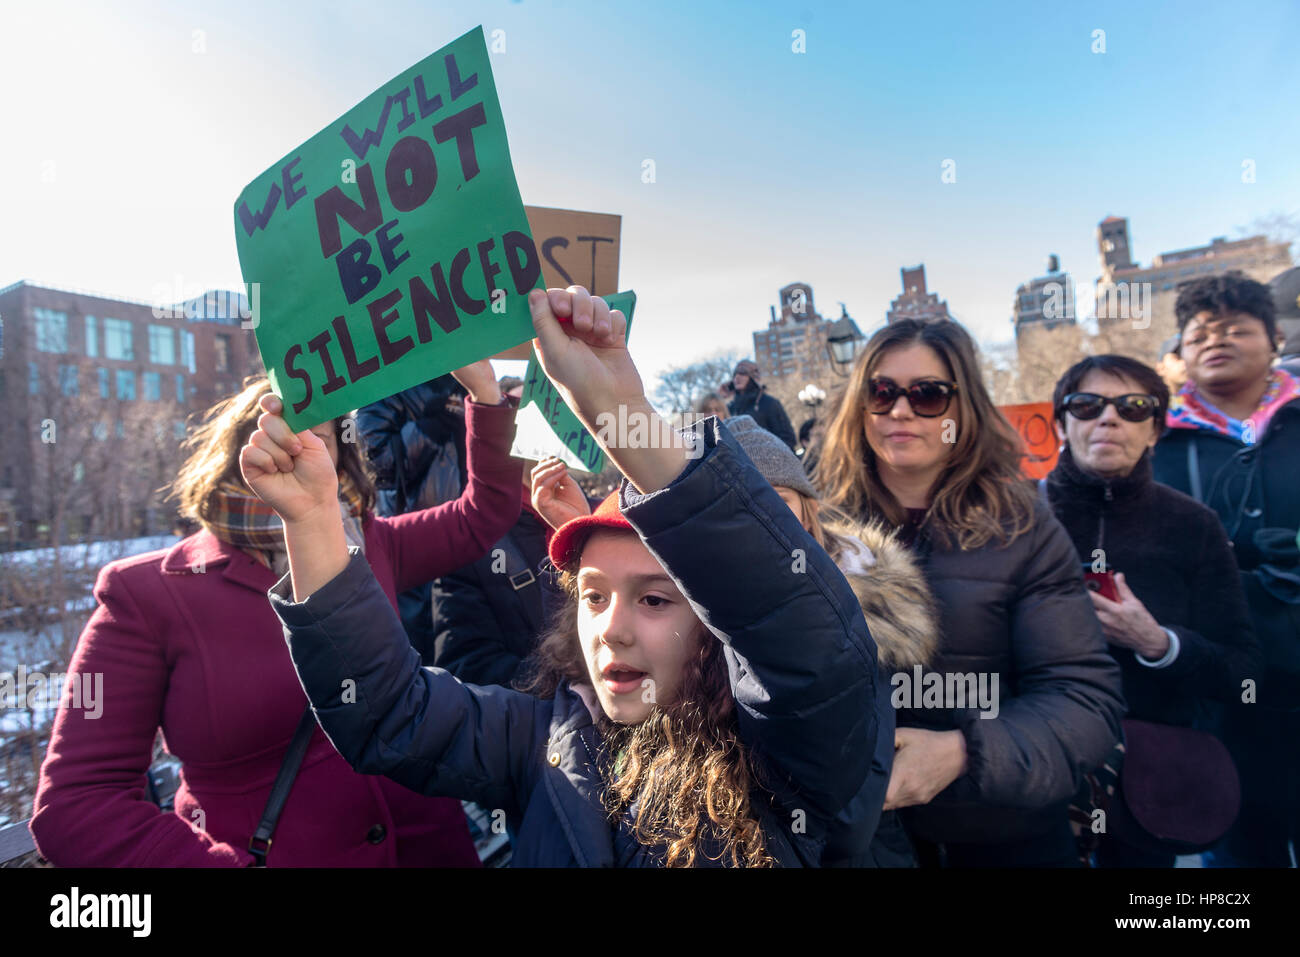 New York, USA 17 February 2017 - Activists rallied in Washington Square, in solidary with the  General Strike, to protest Trump Administration and their anti-democratic policies.  ©Stacy Walsh Rosenstock/Alamy Stock Photo